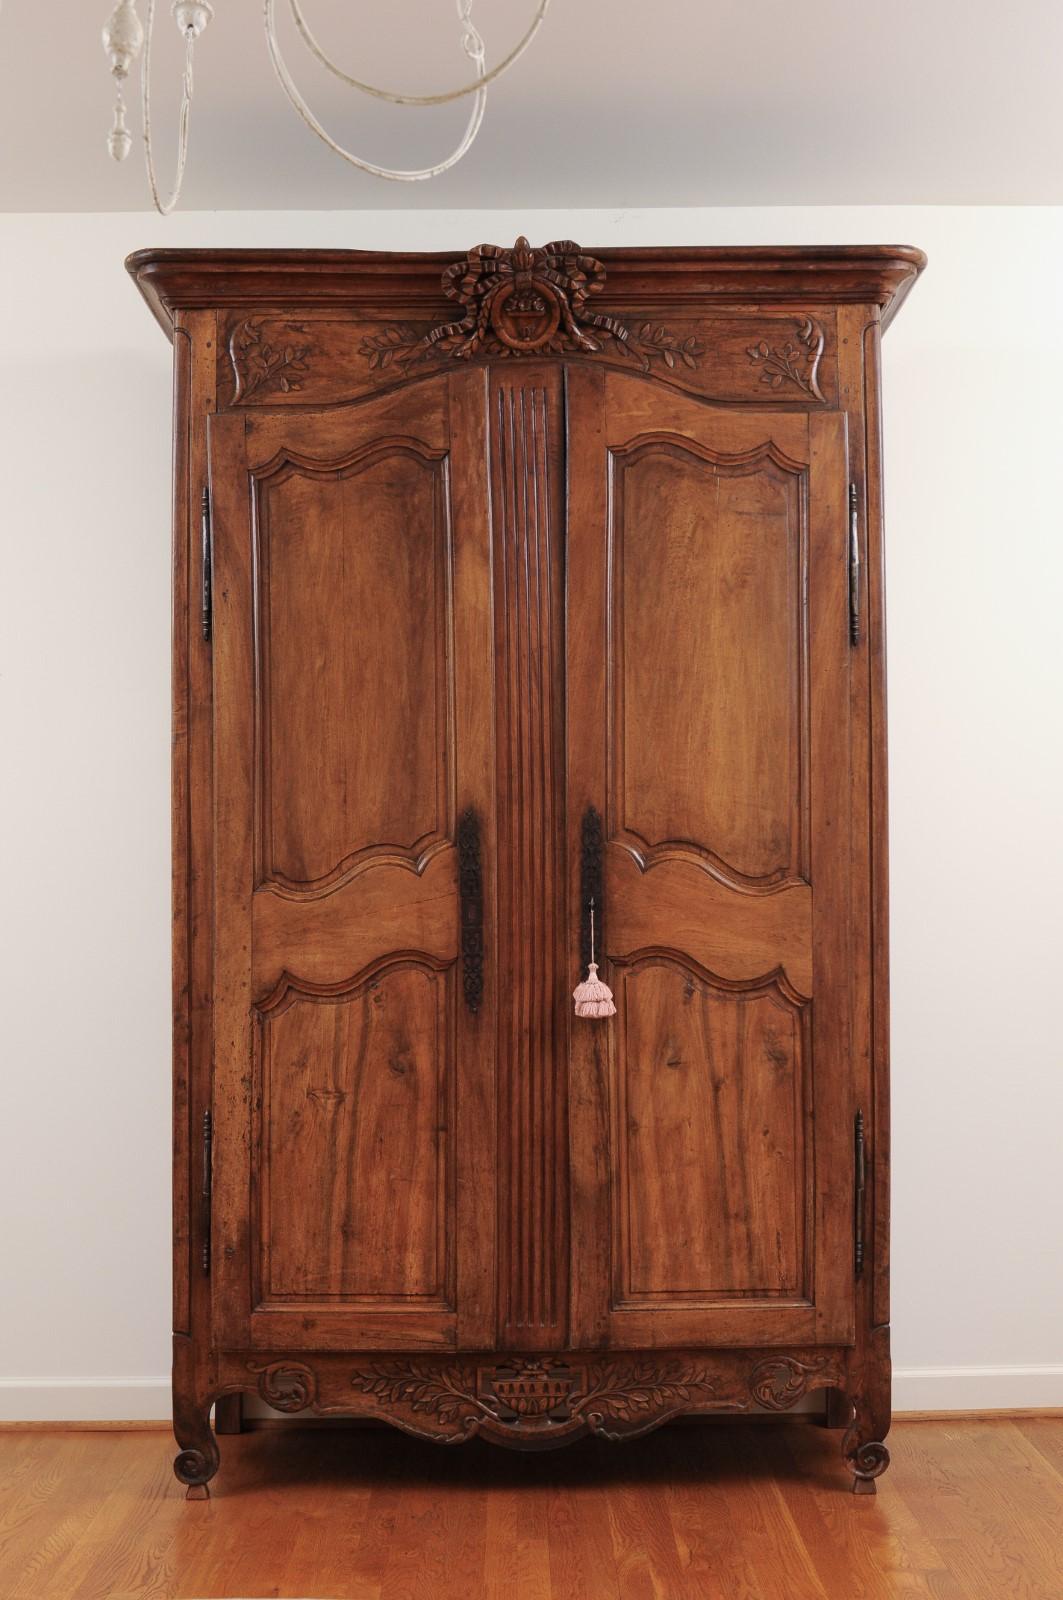 A French transition walnut armoire from the late 18th century, with carved crest and apron. Created in France during the last decade of the 18th century, this armoire showcases the delicate transition of style between the Louis XV and Louis XVI